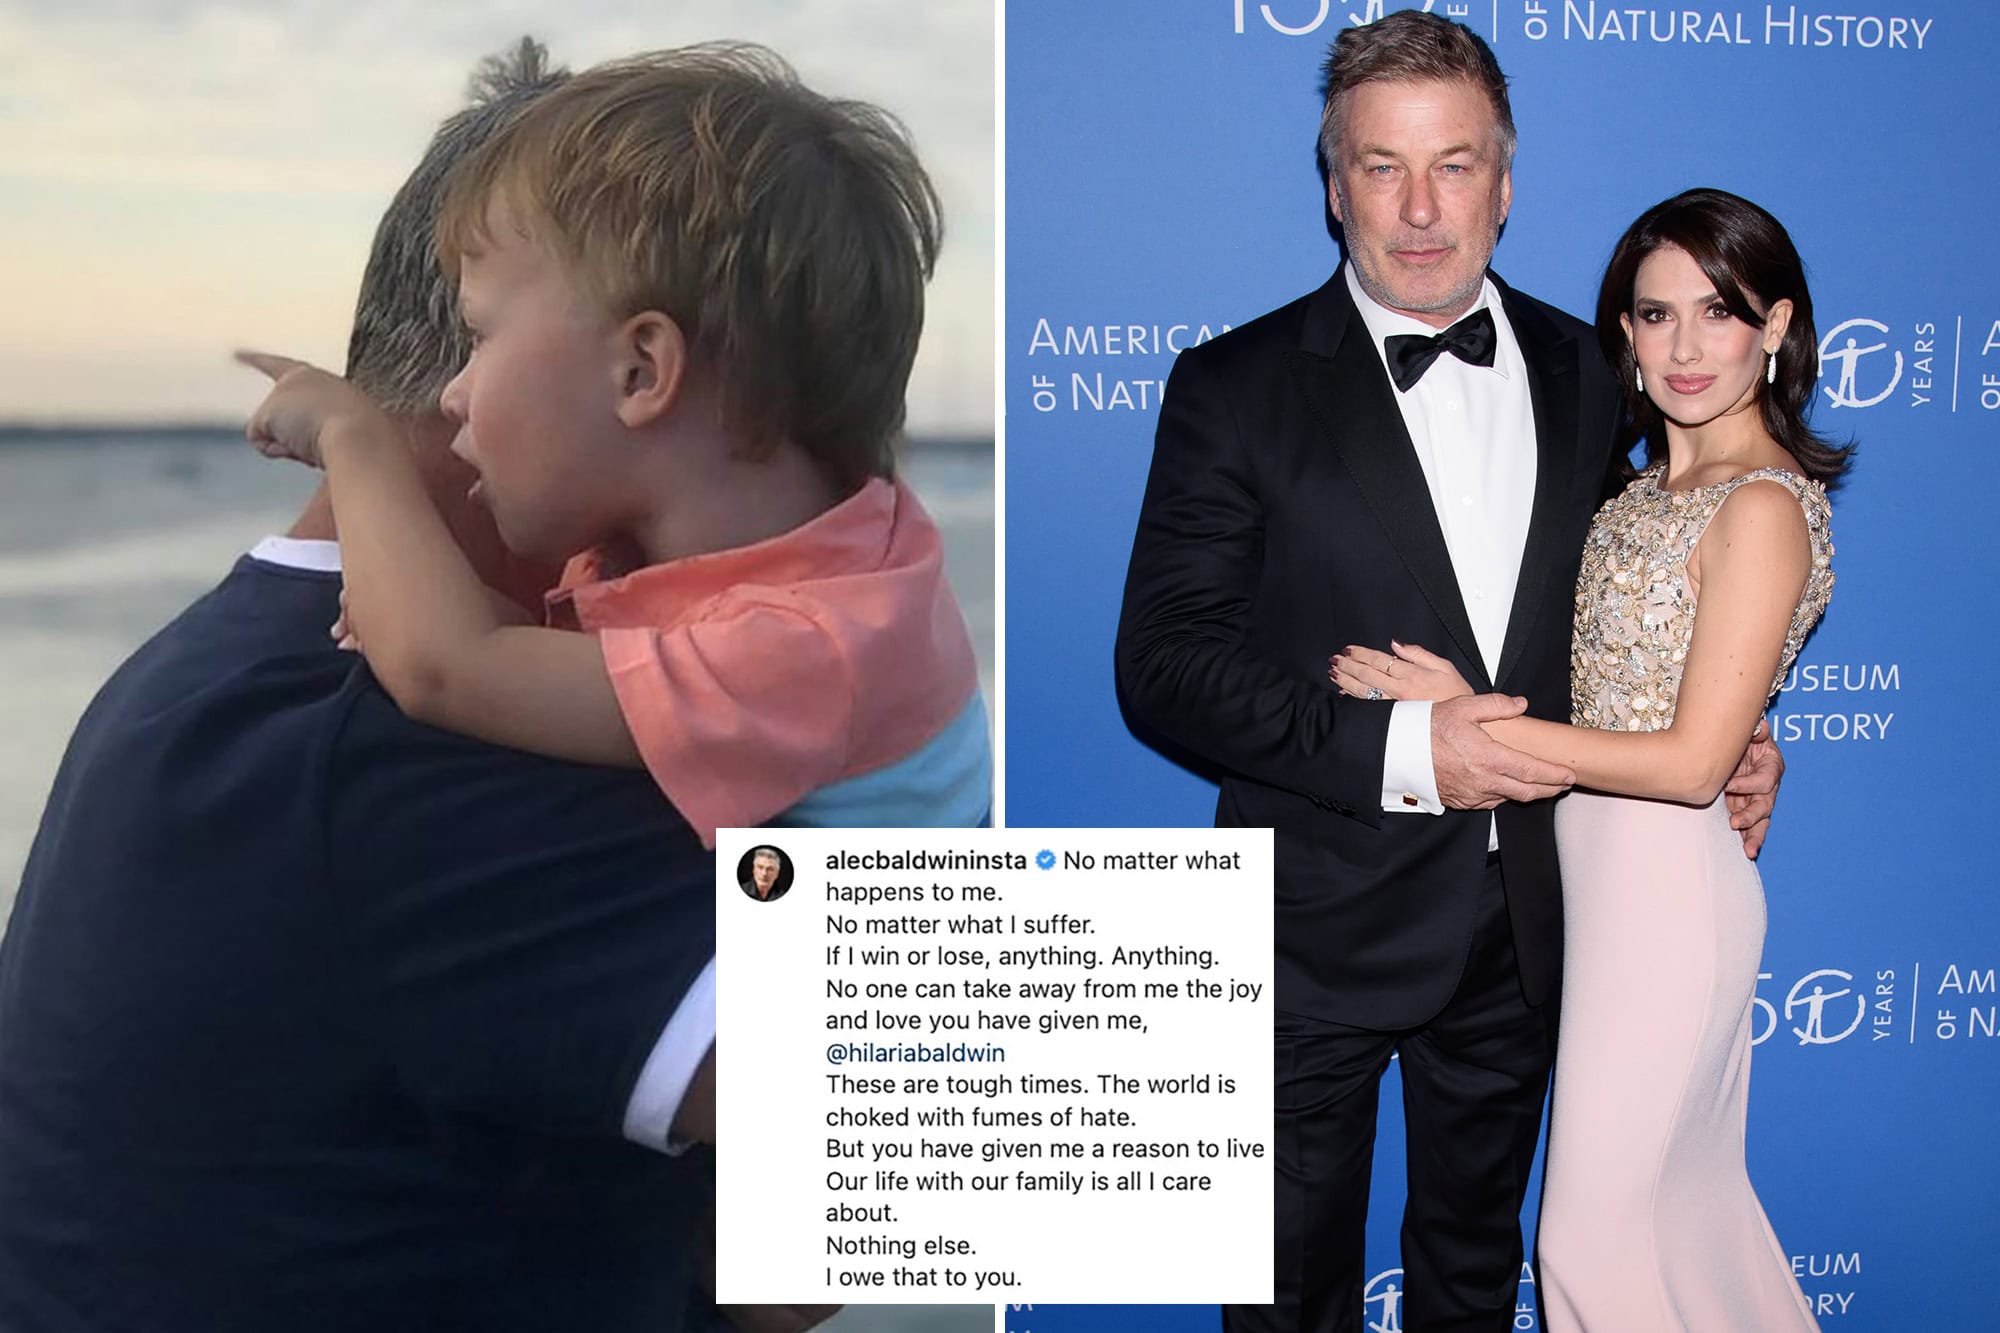 Alec and Hilaria Baldwin to Star in New Reality Show Featuring Their Large Family